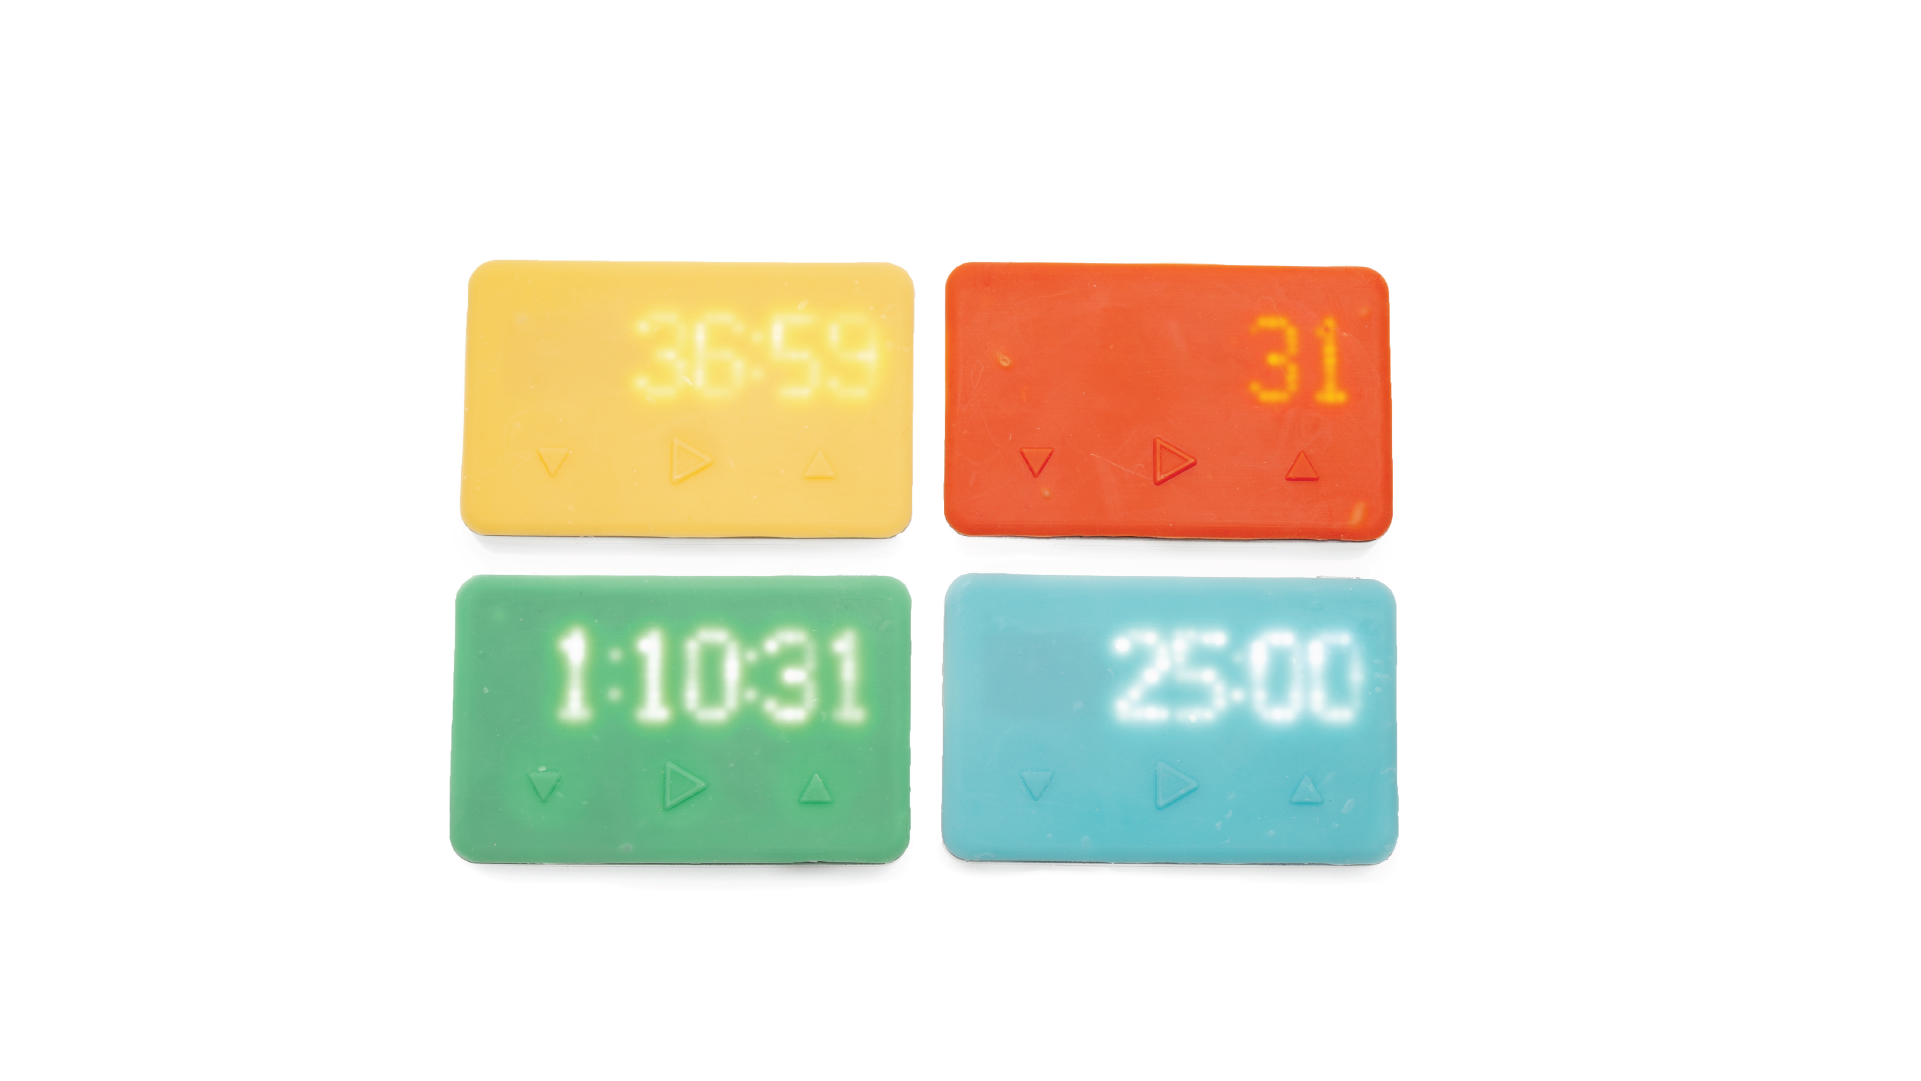 Set of 4 timers arranged on the yellow, red, green and blue colors.